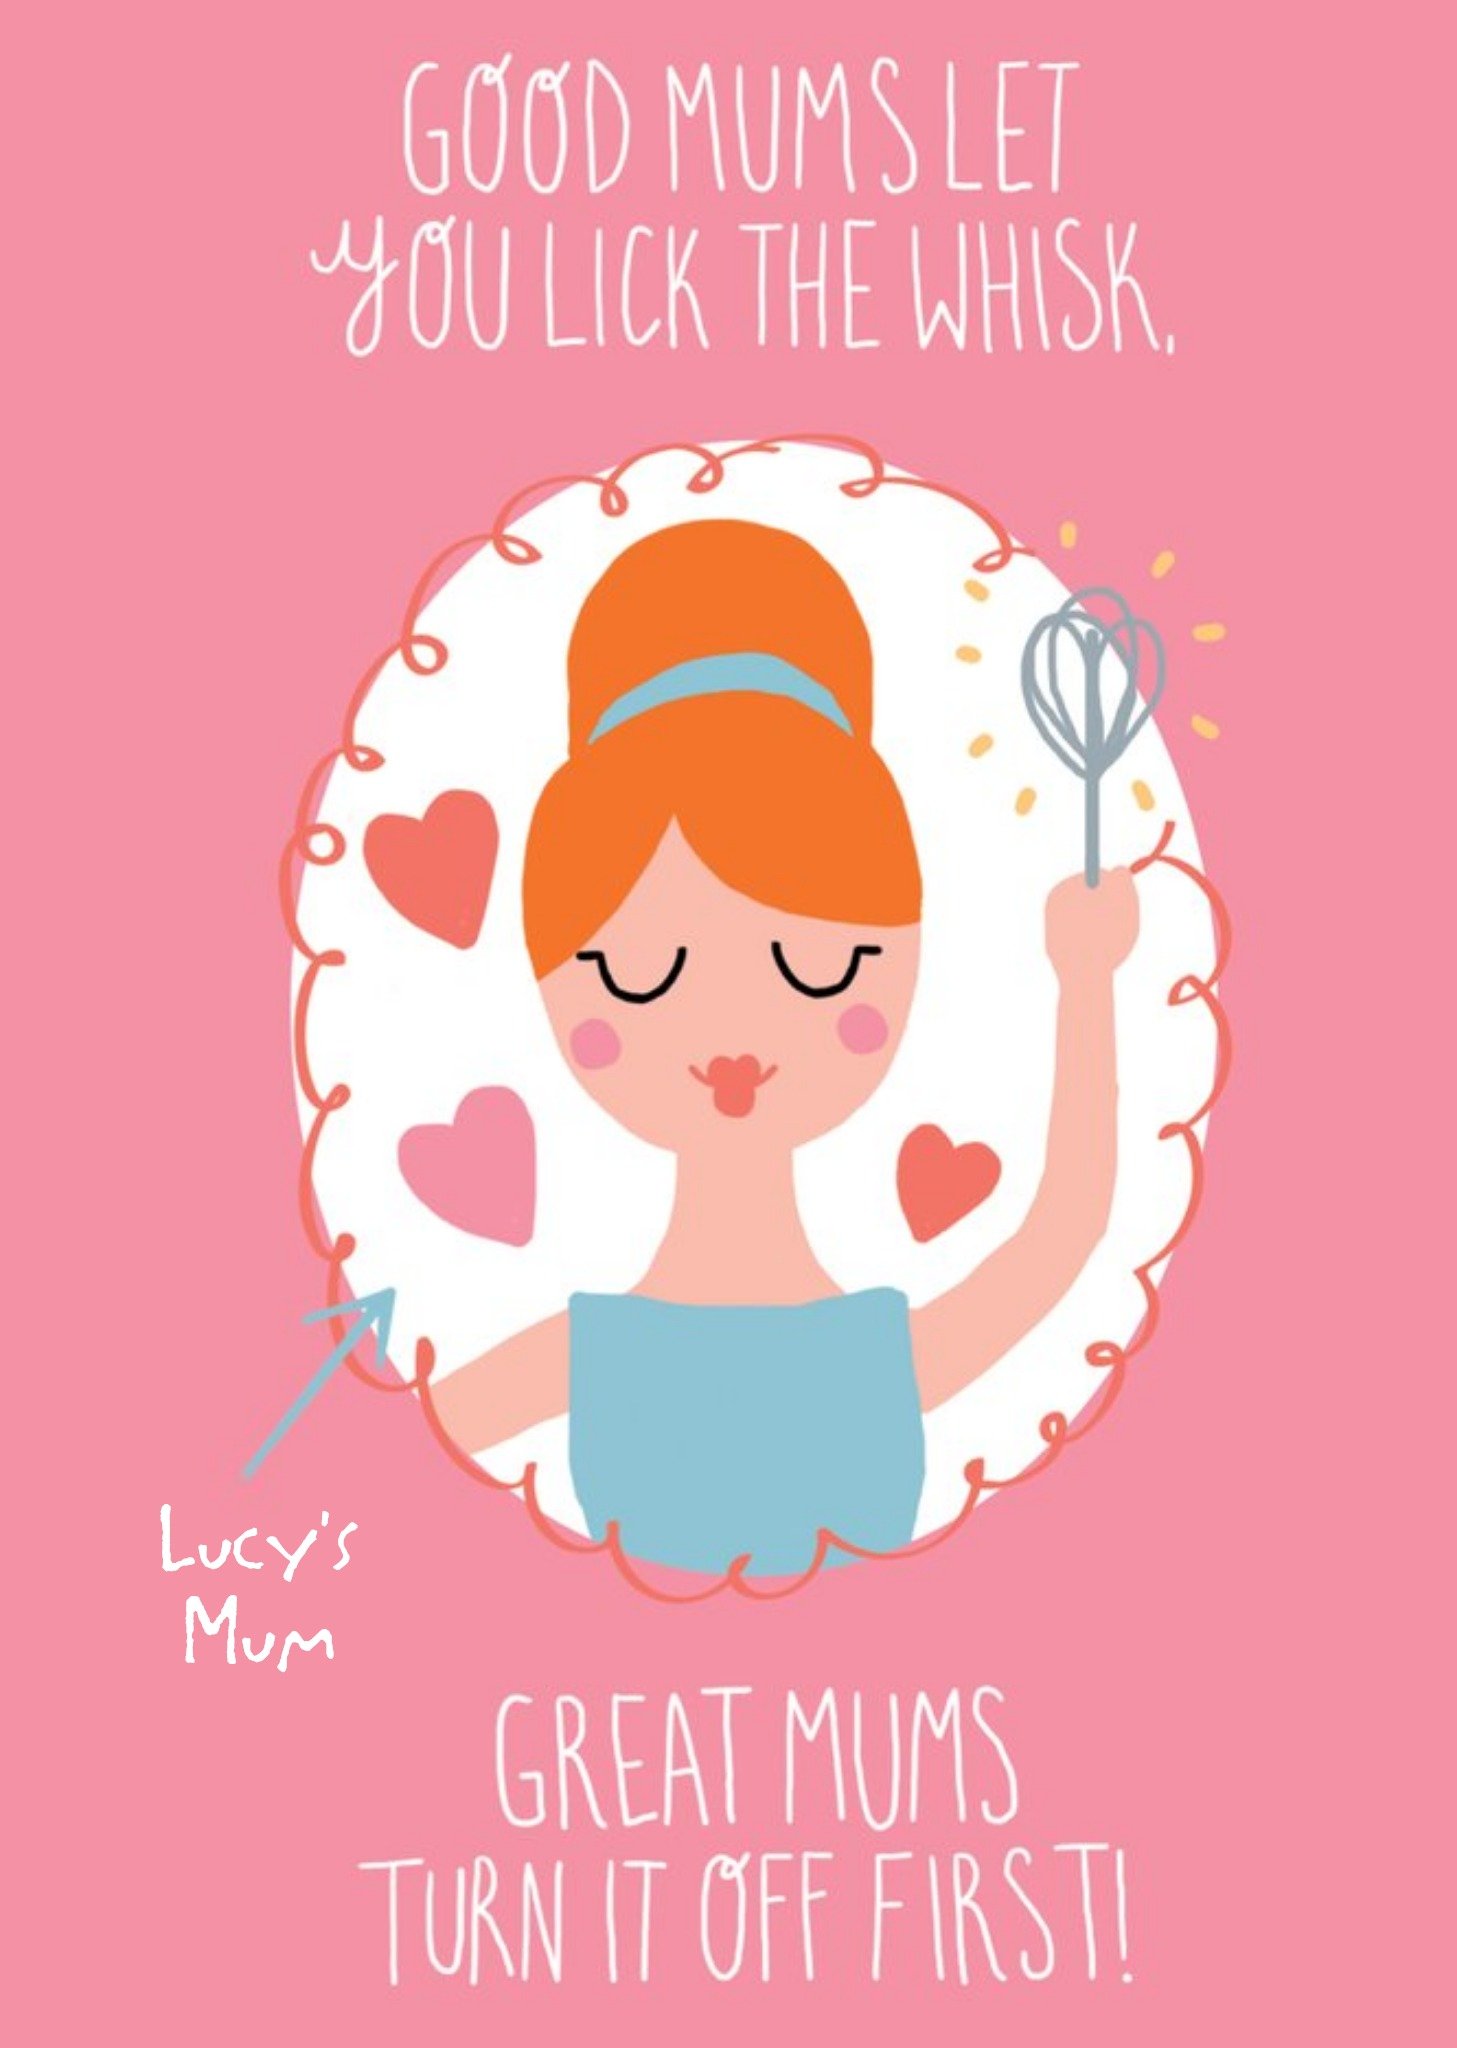 Moonpig Mother's Day Card - Funny Card - Baking - Good Mum Let You Lick The Whisk Ecard